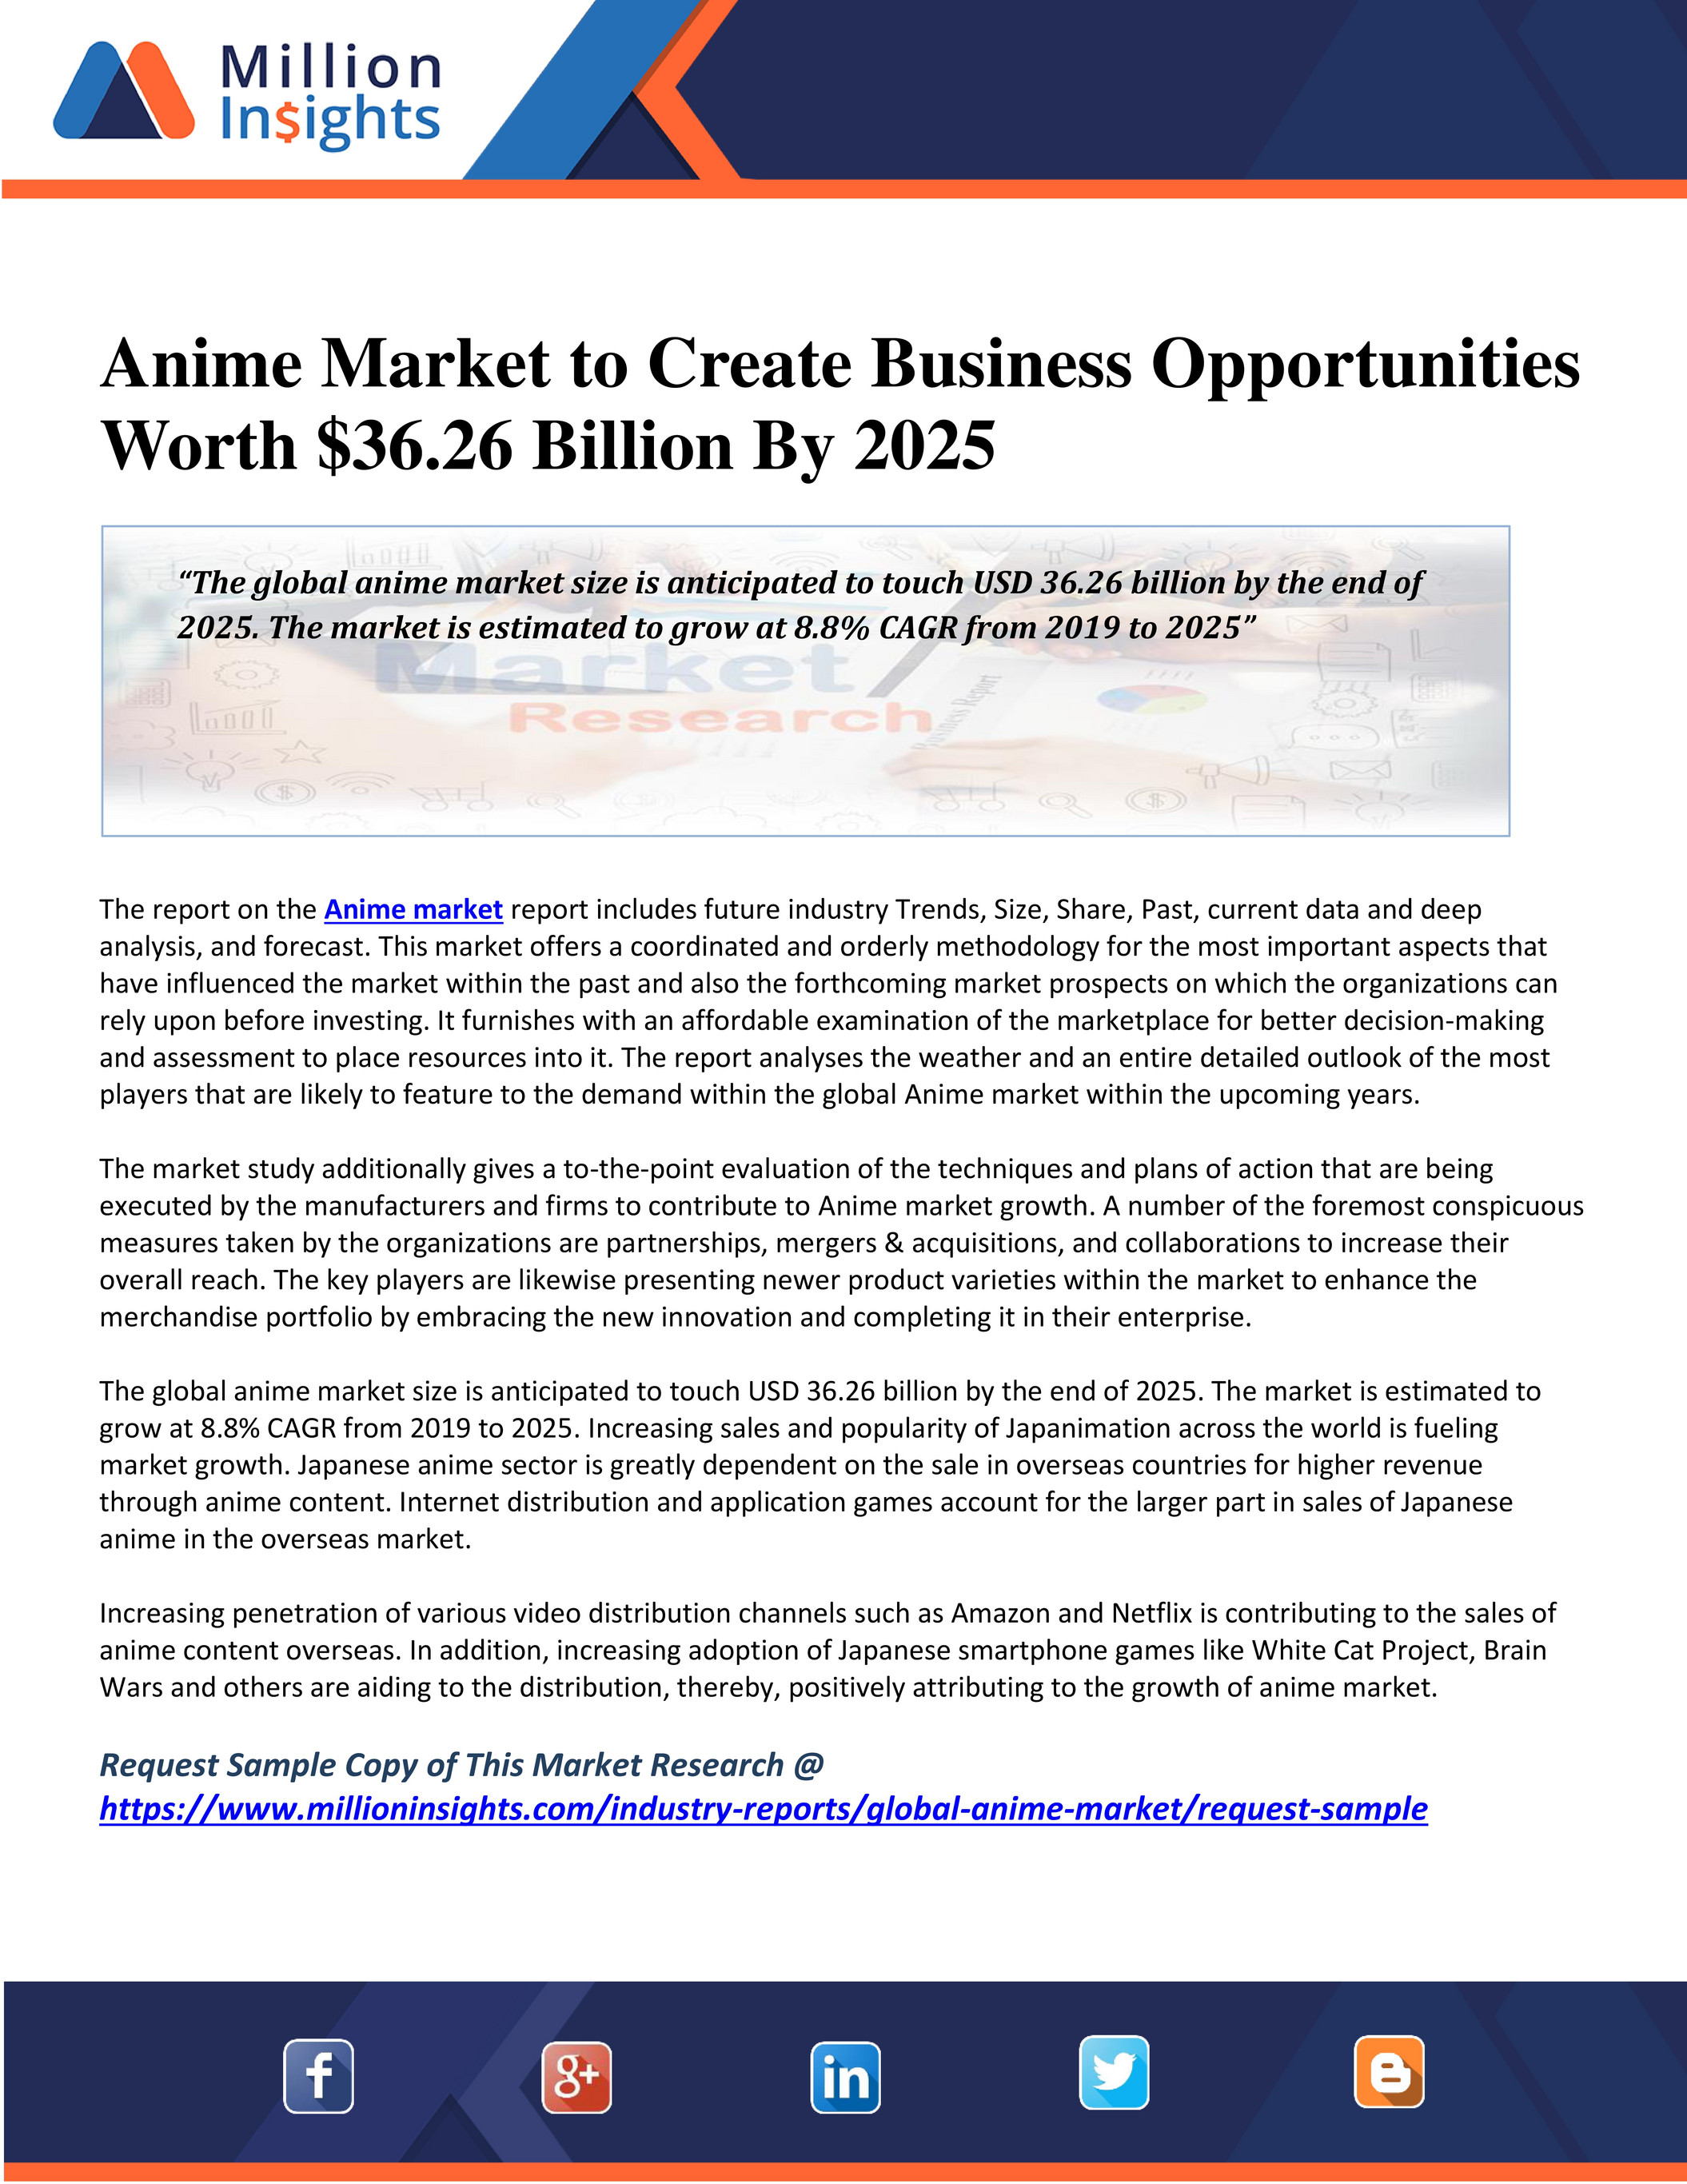 Million Insights - Anime Market to Create Business Opportunities Worth  $ Billion By 2025 - Page 1 - Created with 